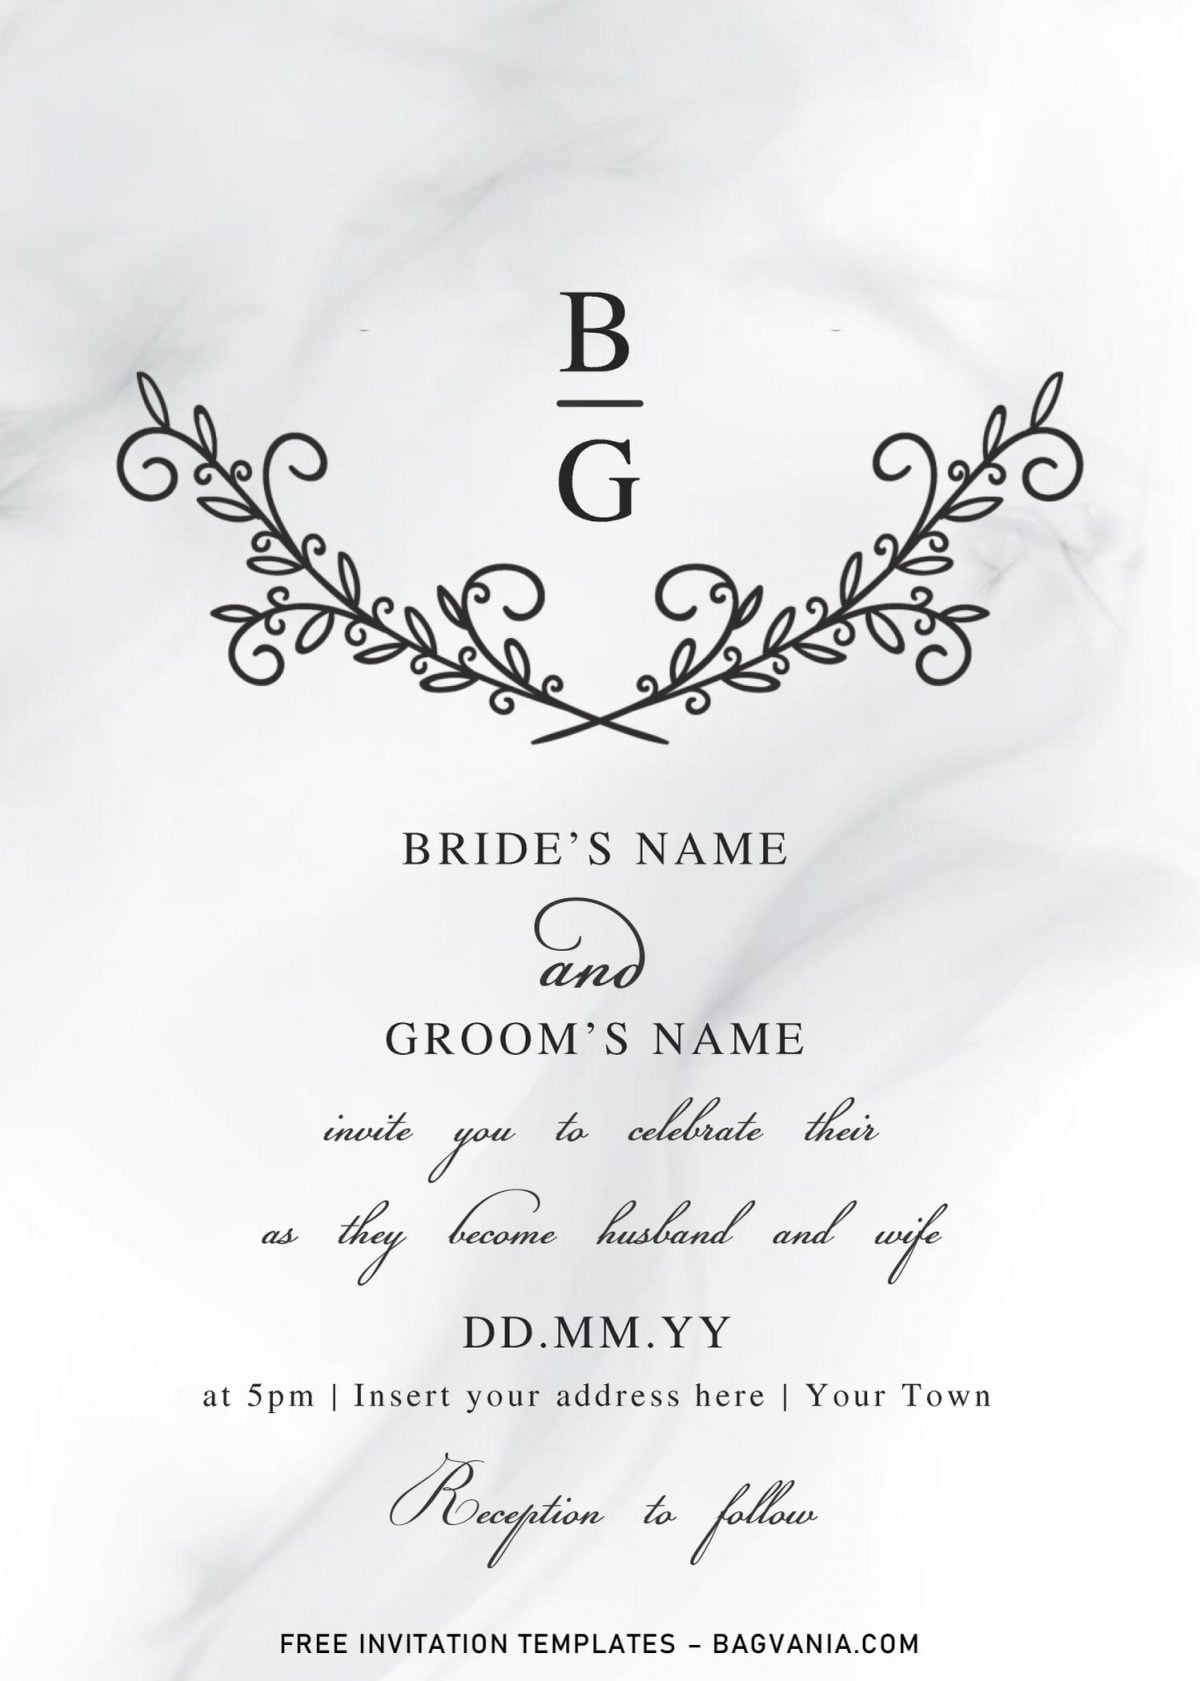 Free Floral Monogram Wedding Invitation Templates For Word and has elegant floral crest